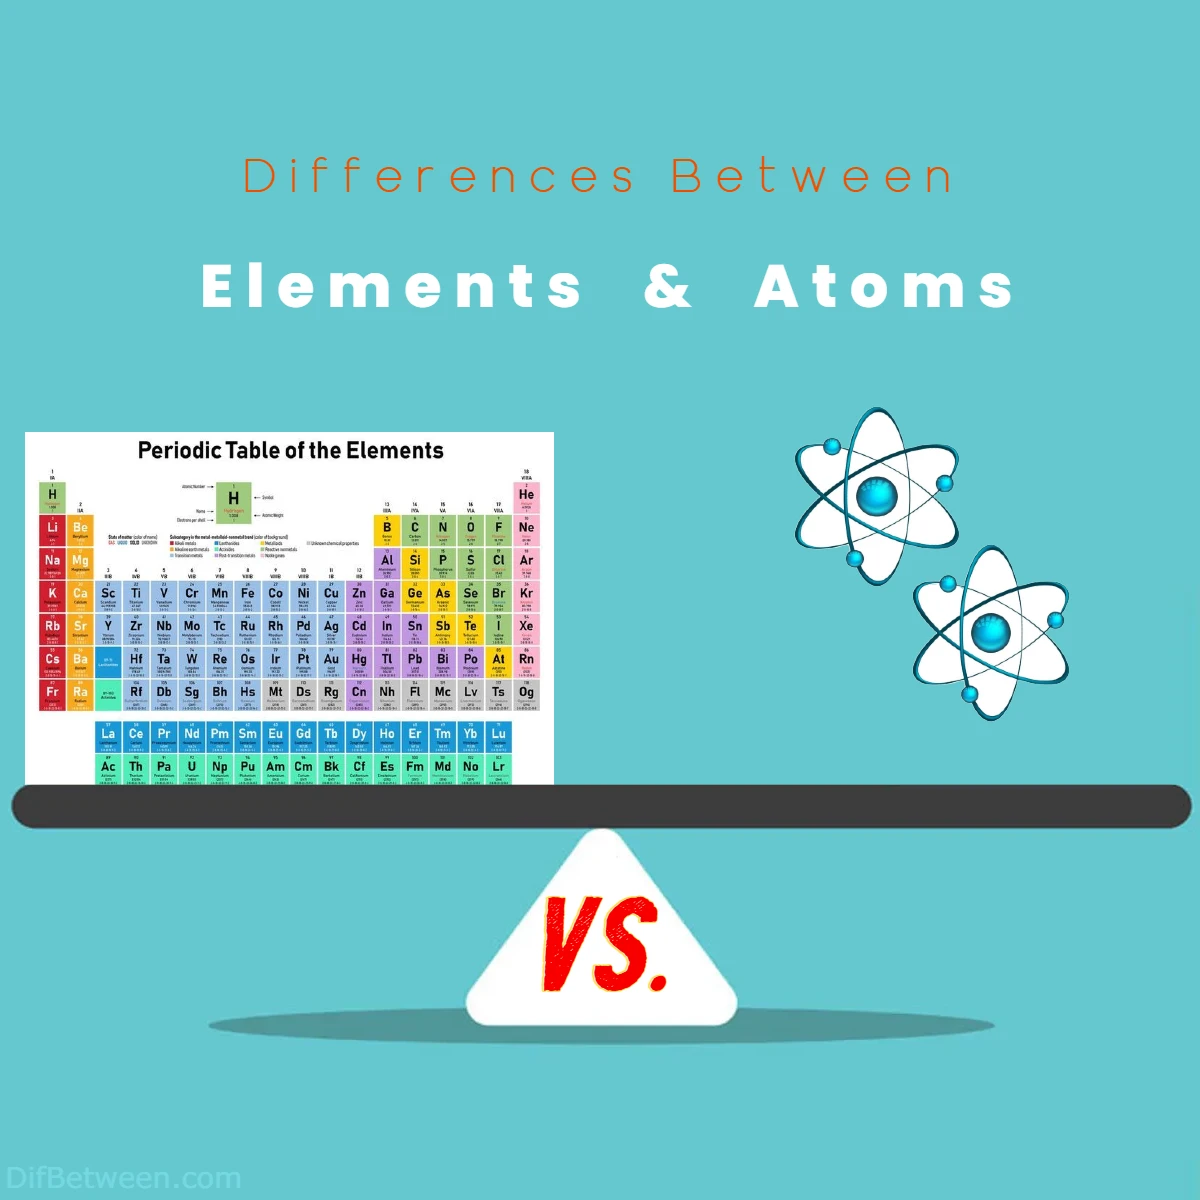 Differences Between Elements vs Atoms